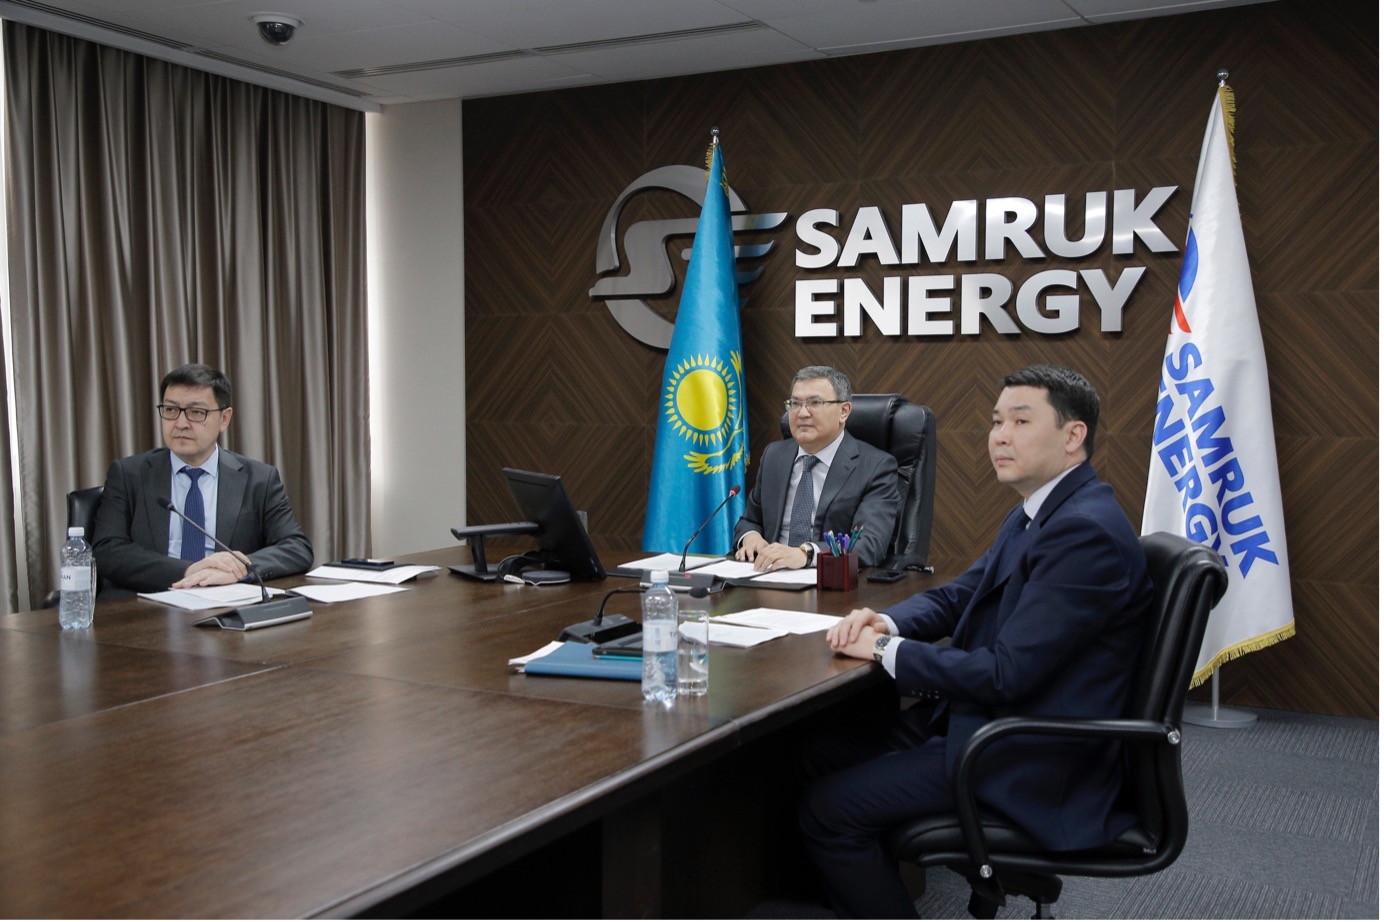 Trilateral cooperation agreement signed by Samruk-Energy, CHN Energy, and EN+